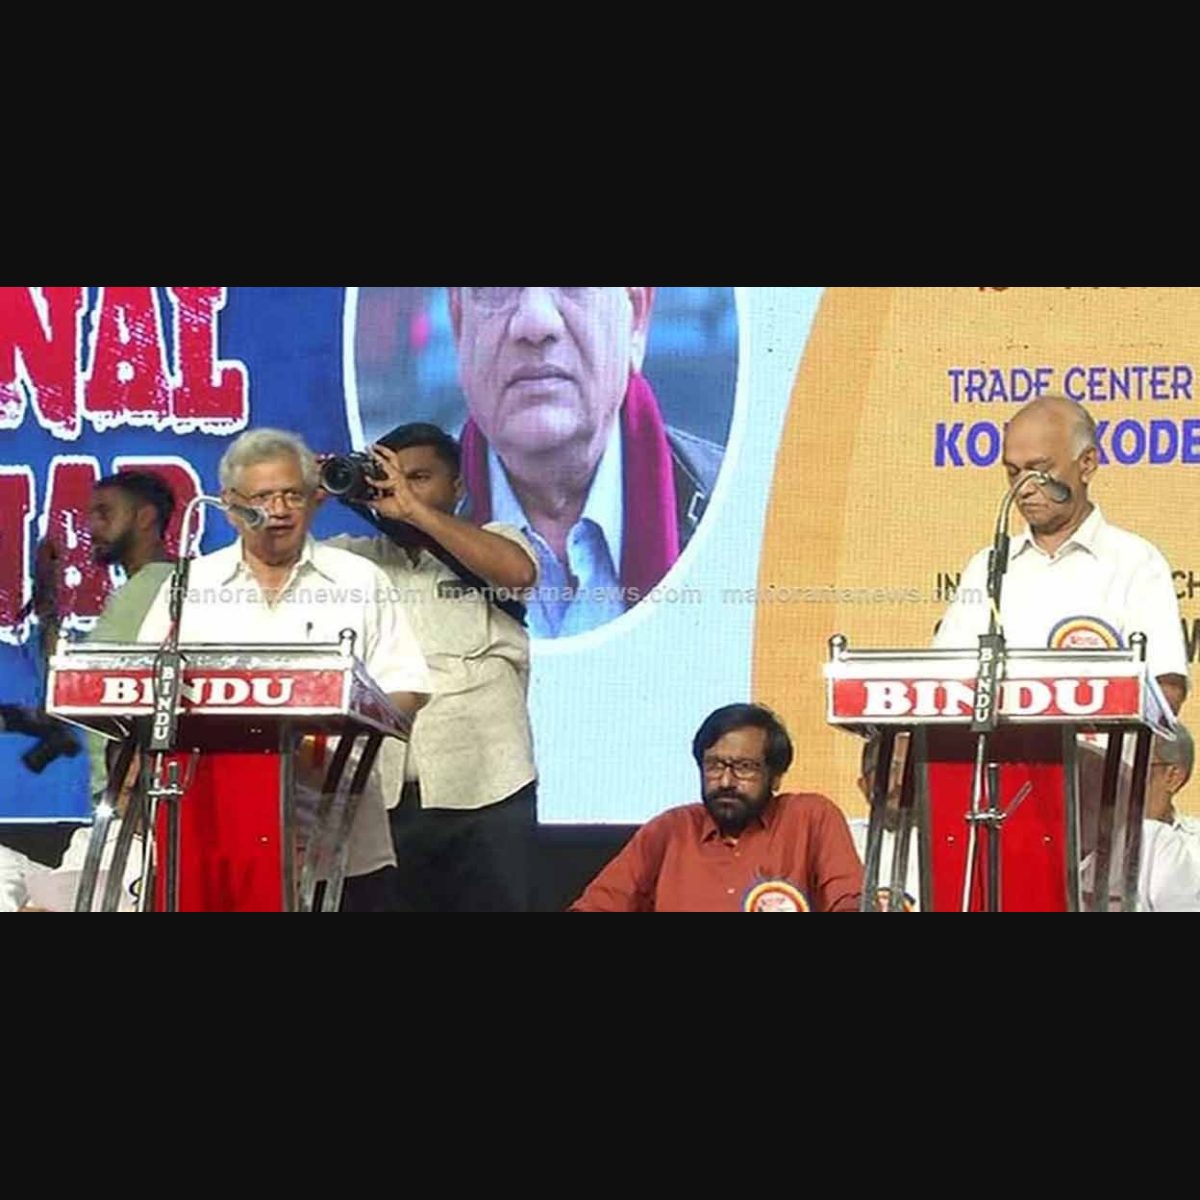 CPM kicks off seminars on UCC in Kerala, Yechury says only meant